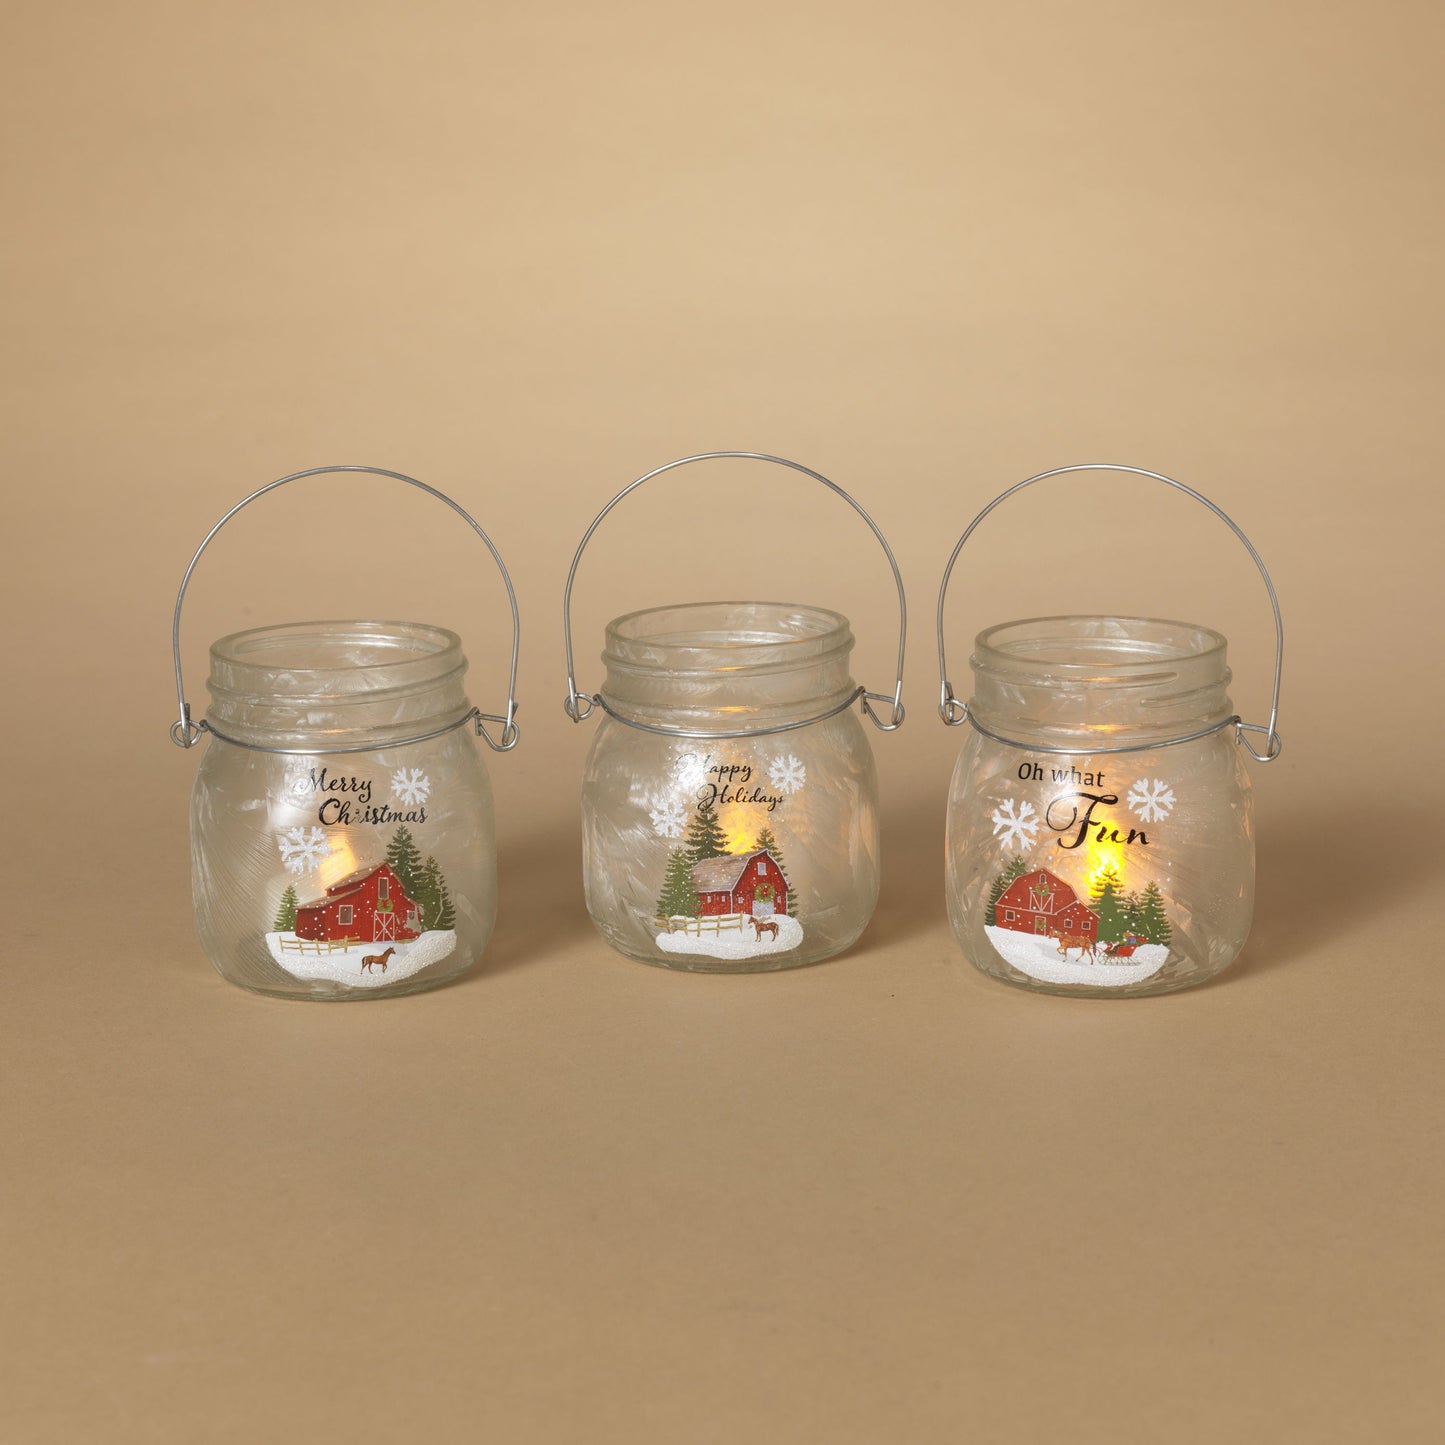 Gerson Company Set of 3 3.5"H Frosted Glass Holiday Barn Design Luminaries